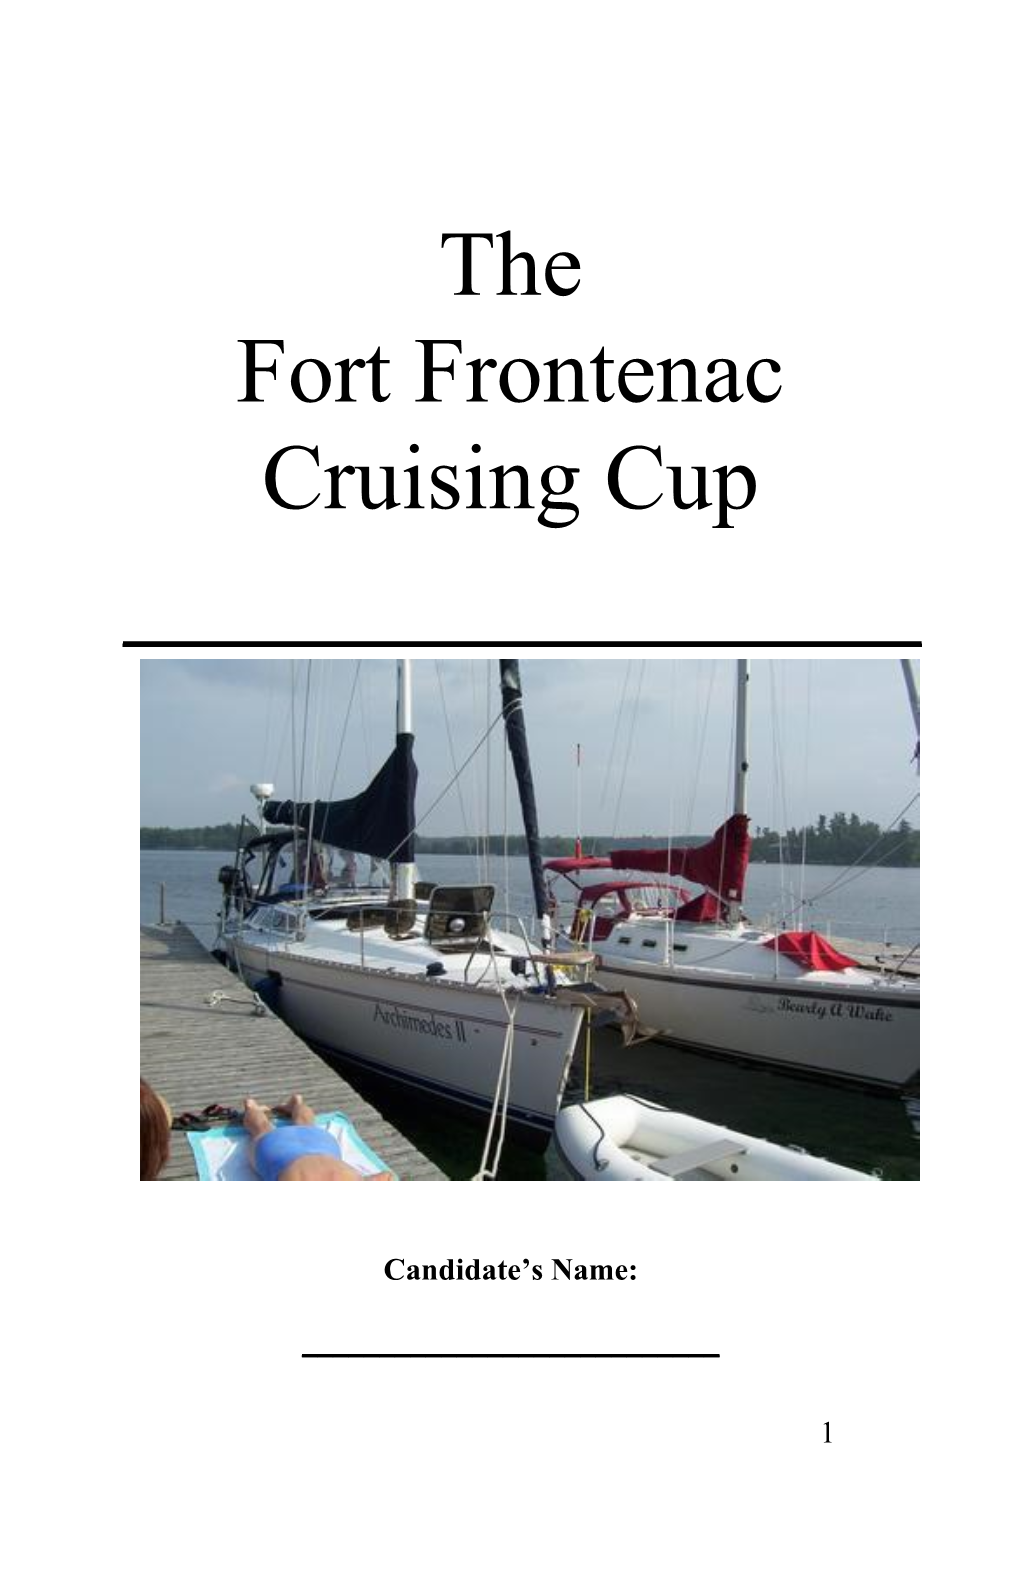 The Fort Frontenac Cruising Cup